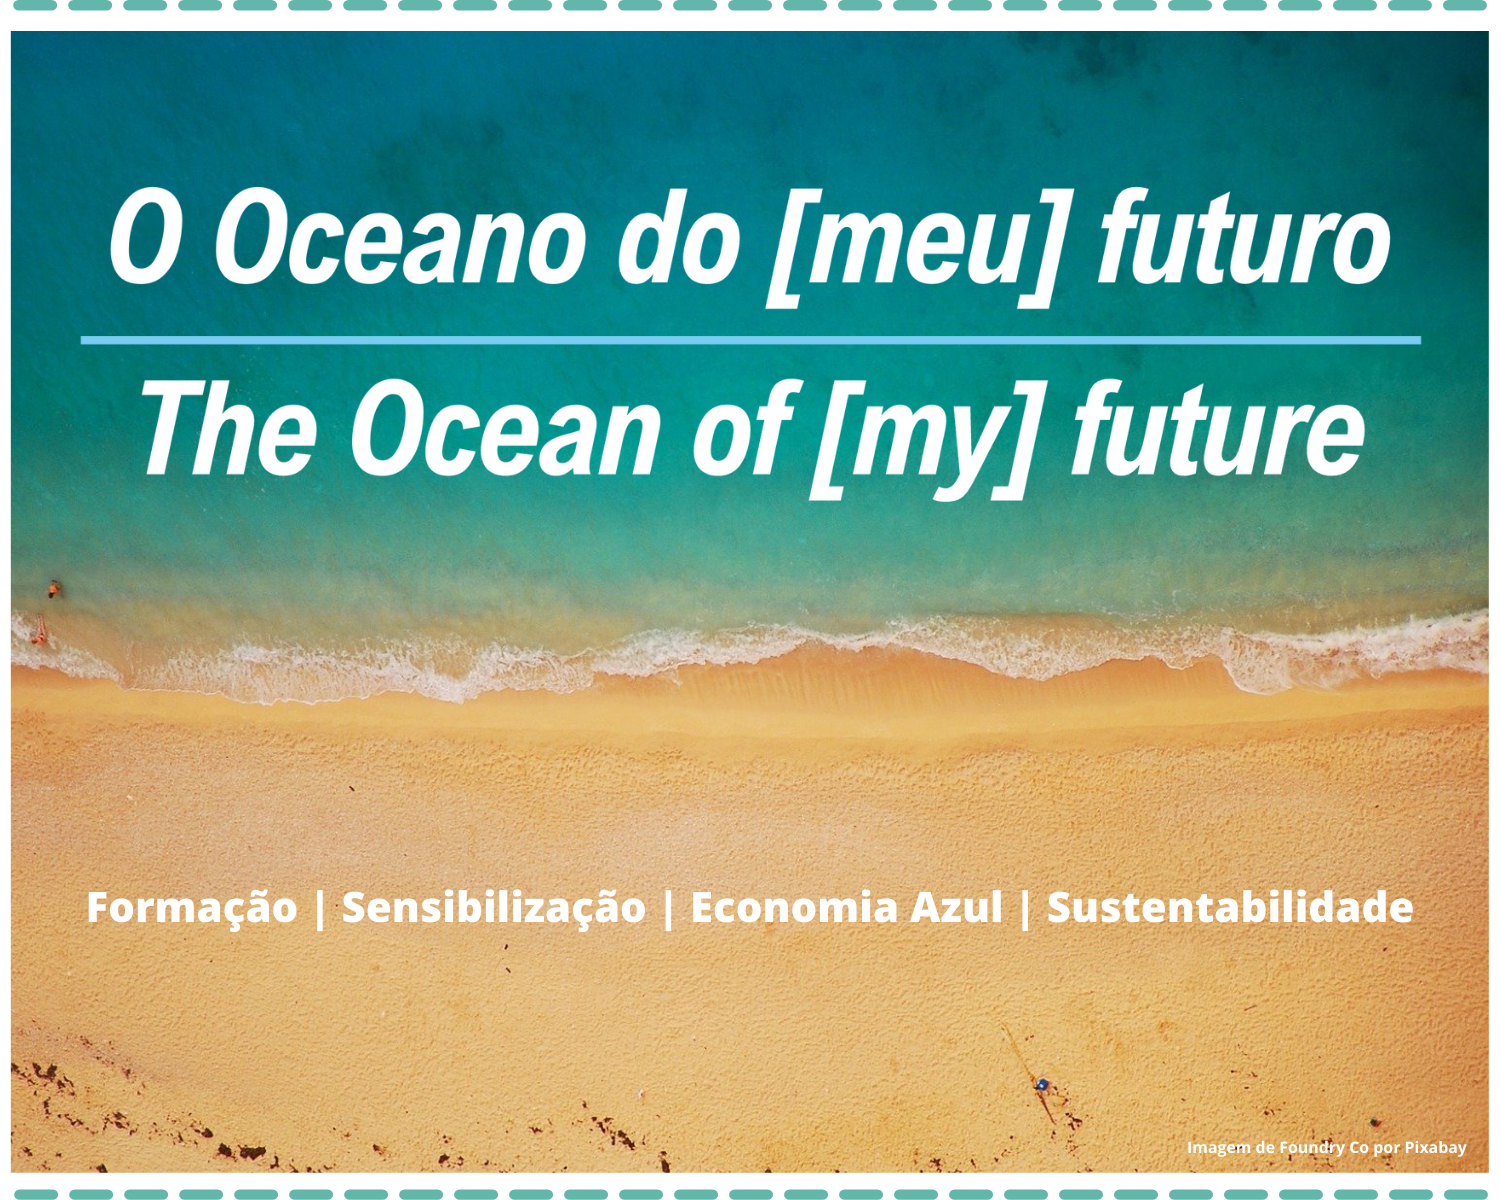 The Ocean of [my] future